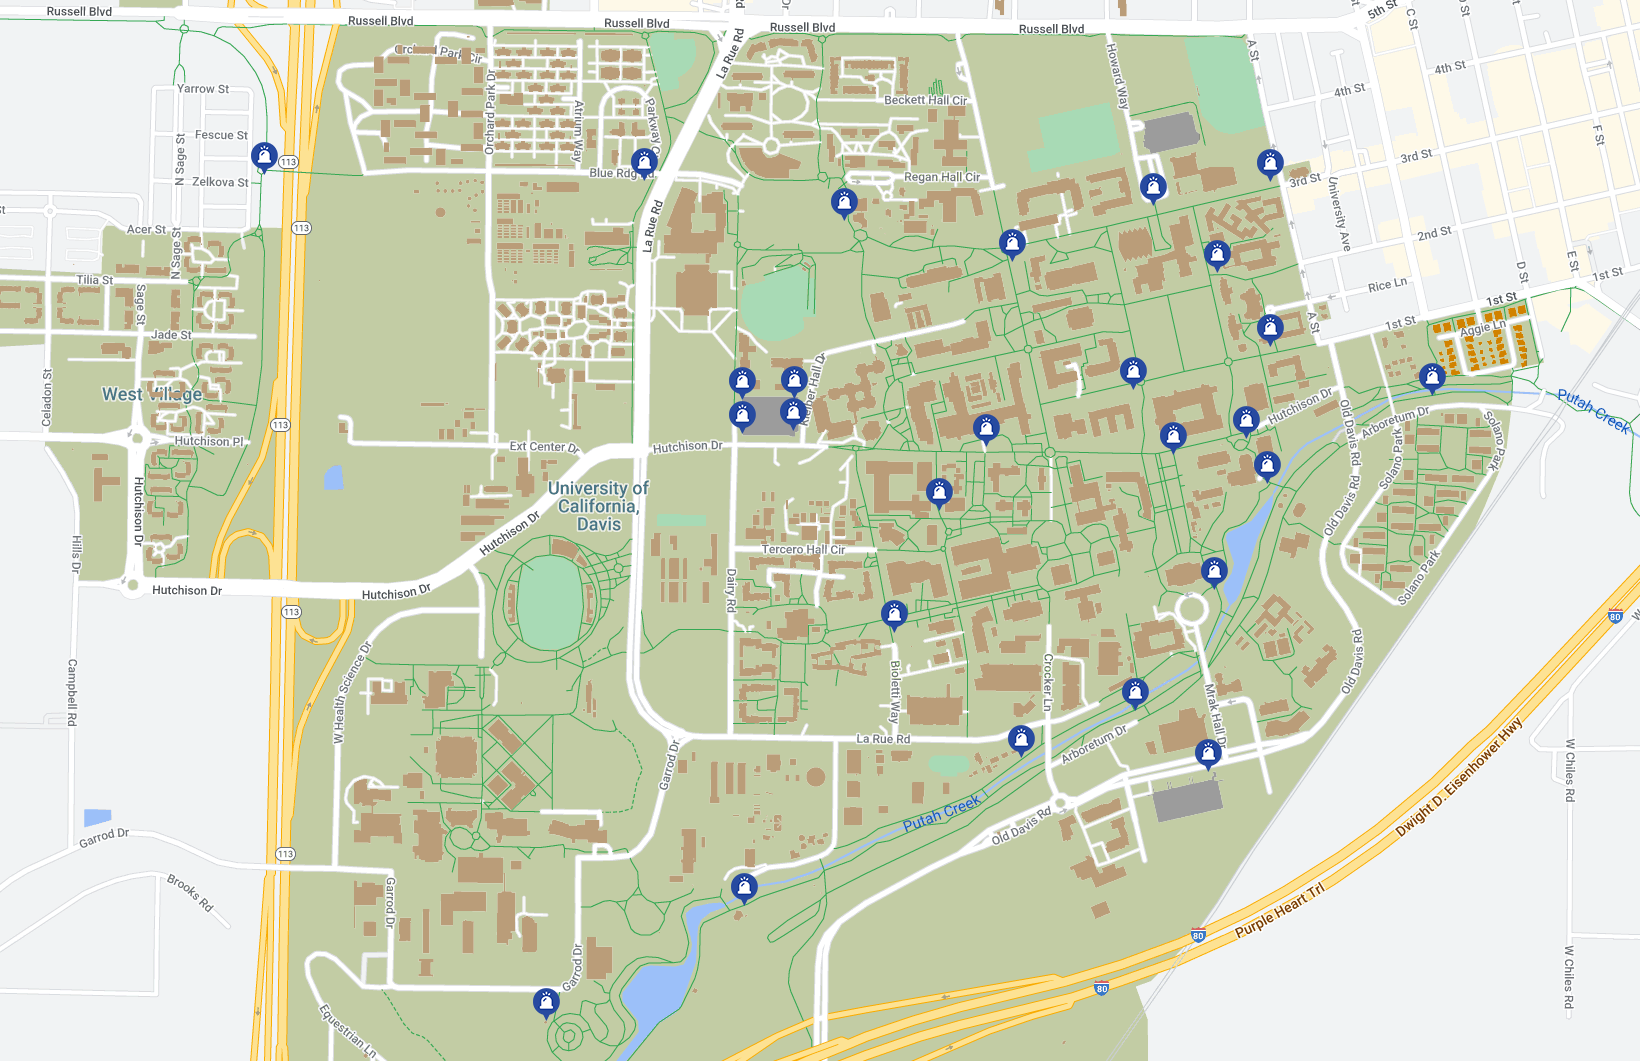 campus map with icons where emergency call boxes are located.